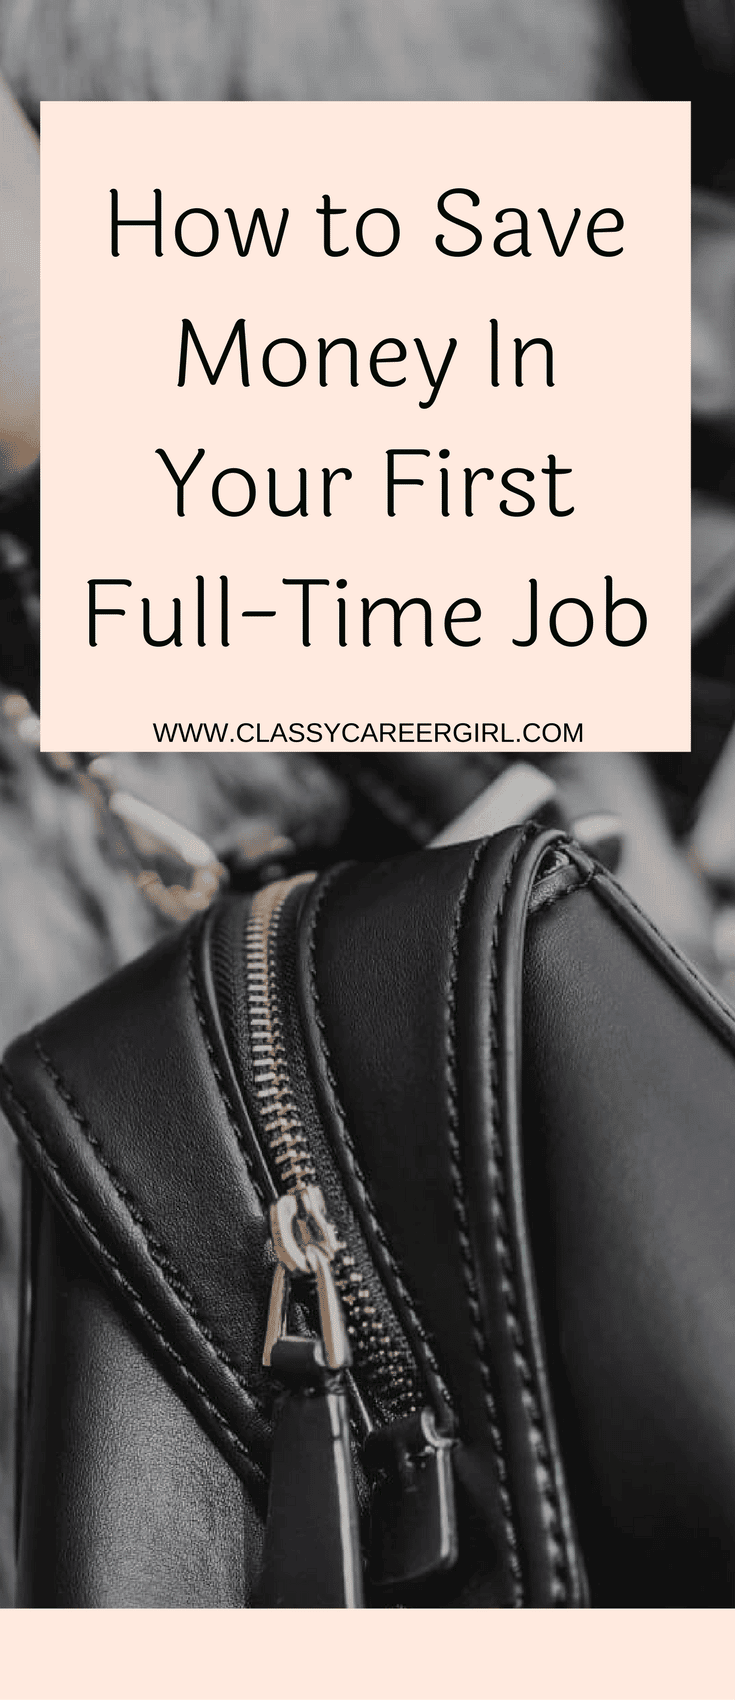 How to Save Money in Your First Full-Time Job | Classy Career Girl